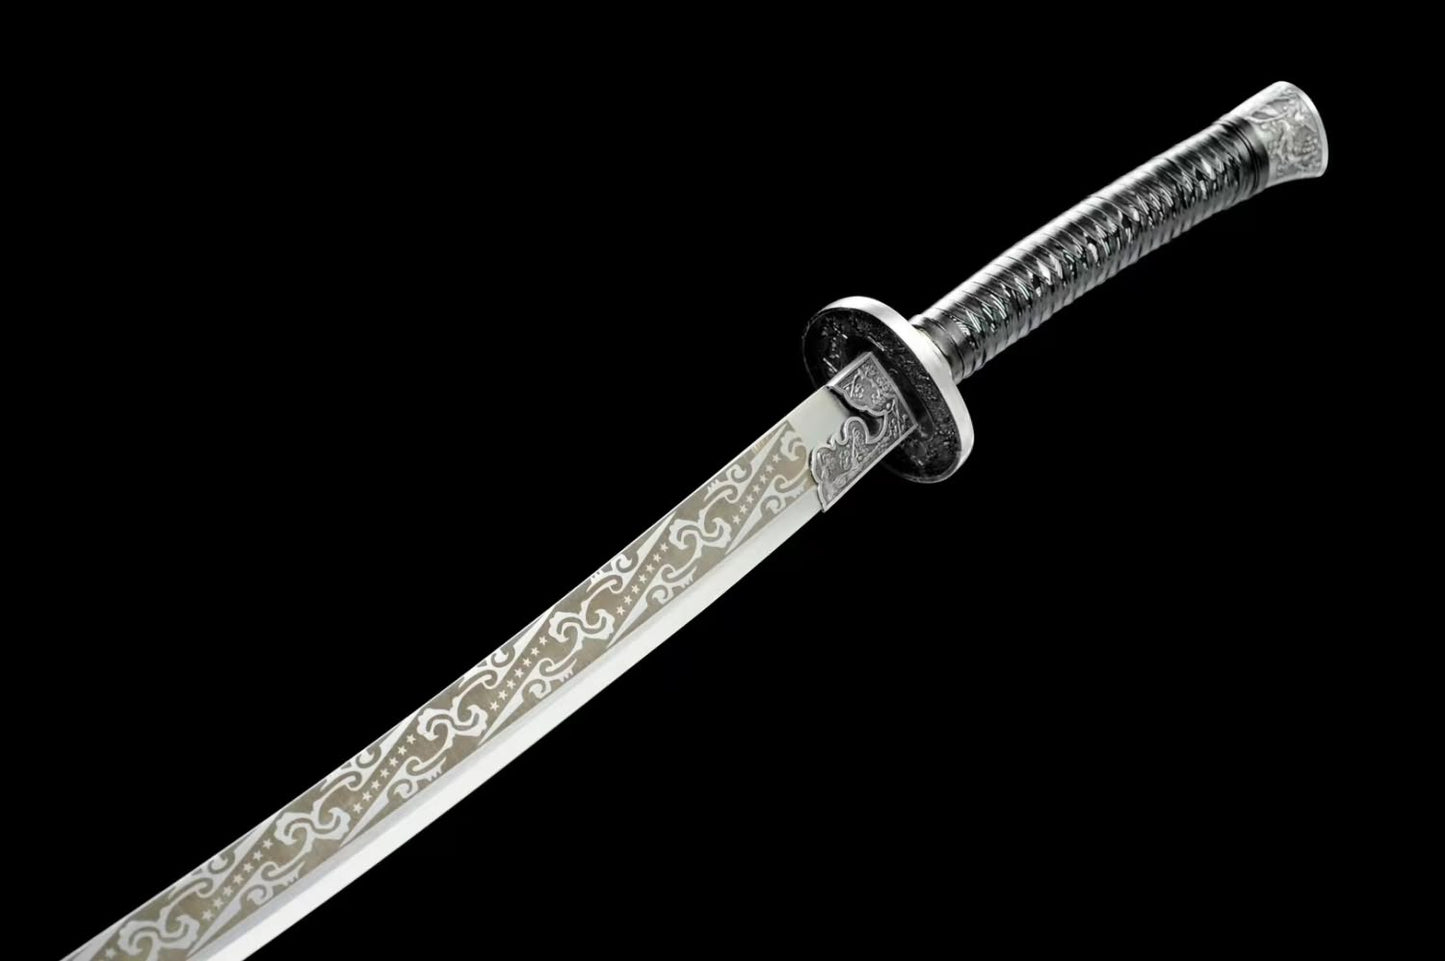 Chinese Meihua Qing dao- Traditional Handcrafted Sword with High Carbon Steel Blade